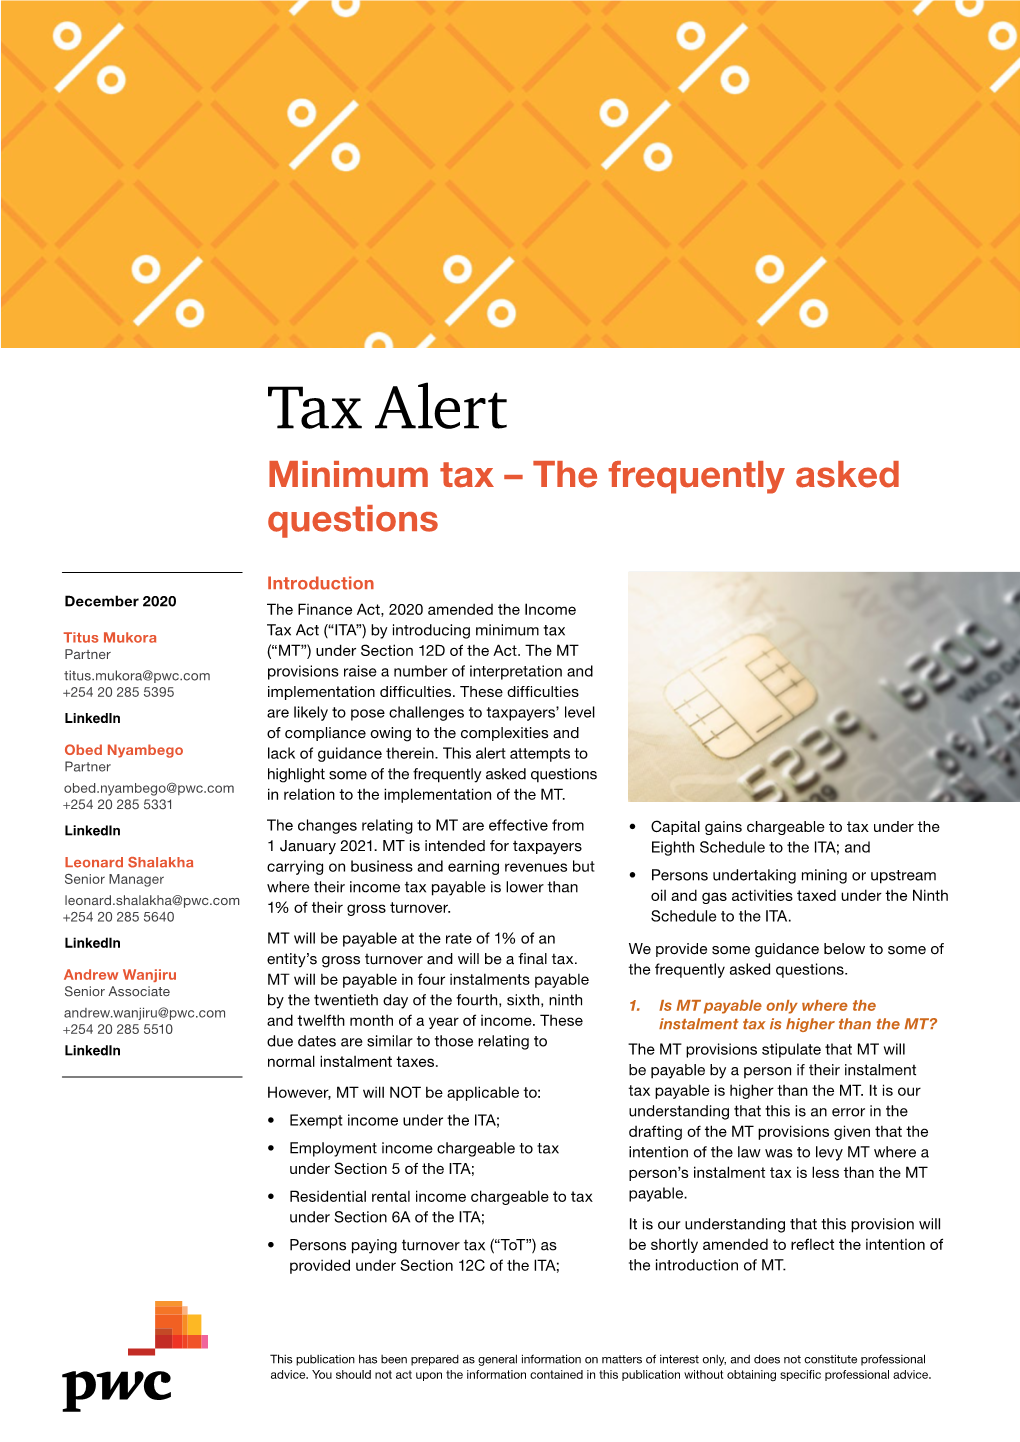 Tax Alert Minimum Tax – the Frequently Asked Questions